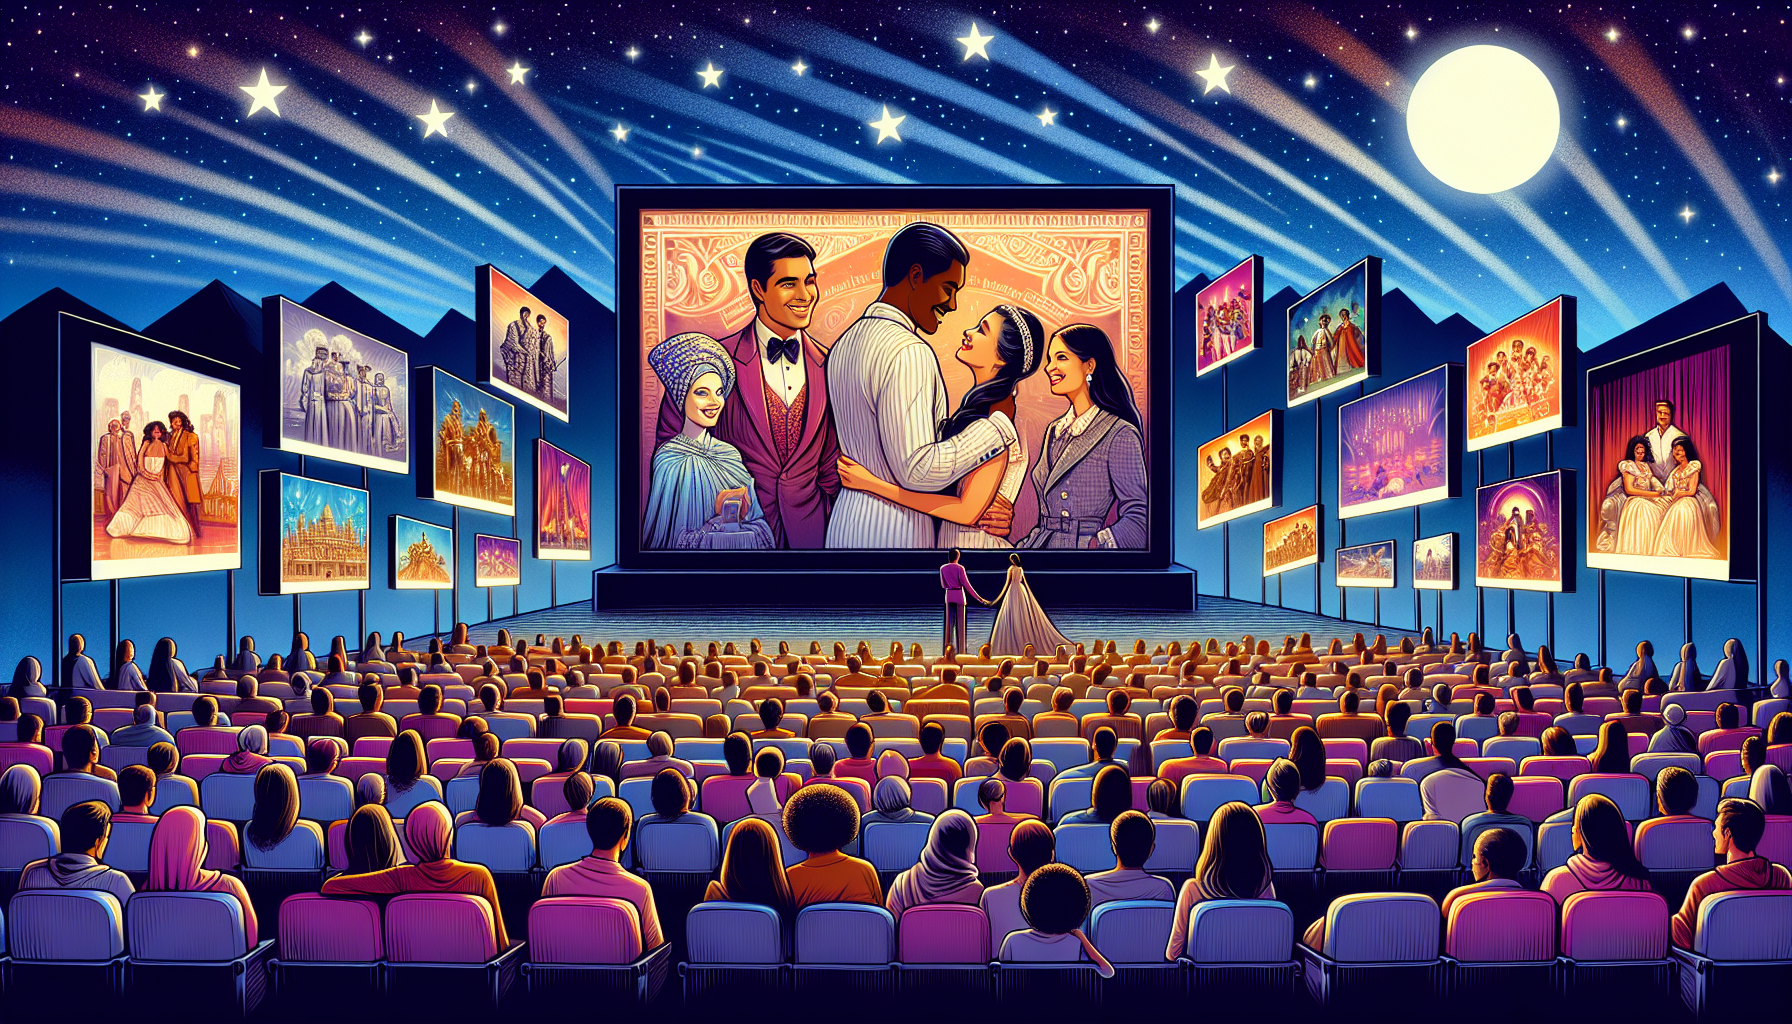 An enchanting outdoor cinema setting under the stars, with multiple screens displaying different iconic scenes from various subgenres of romance films, such as romantic comedy, historical romance, and